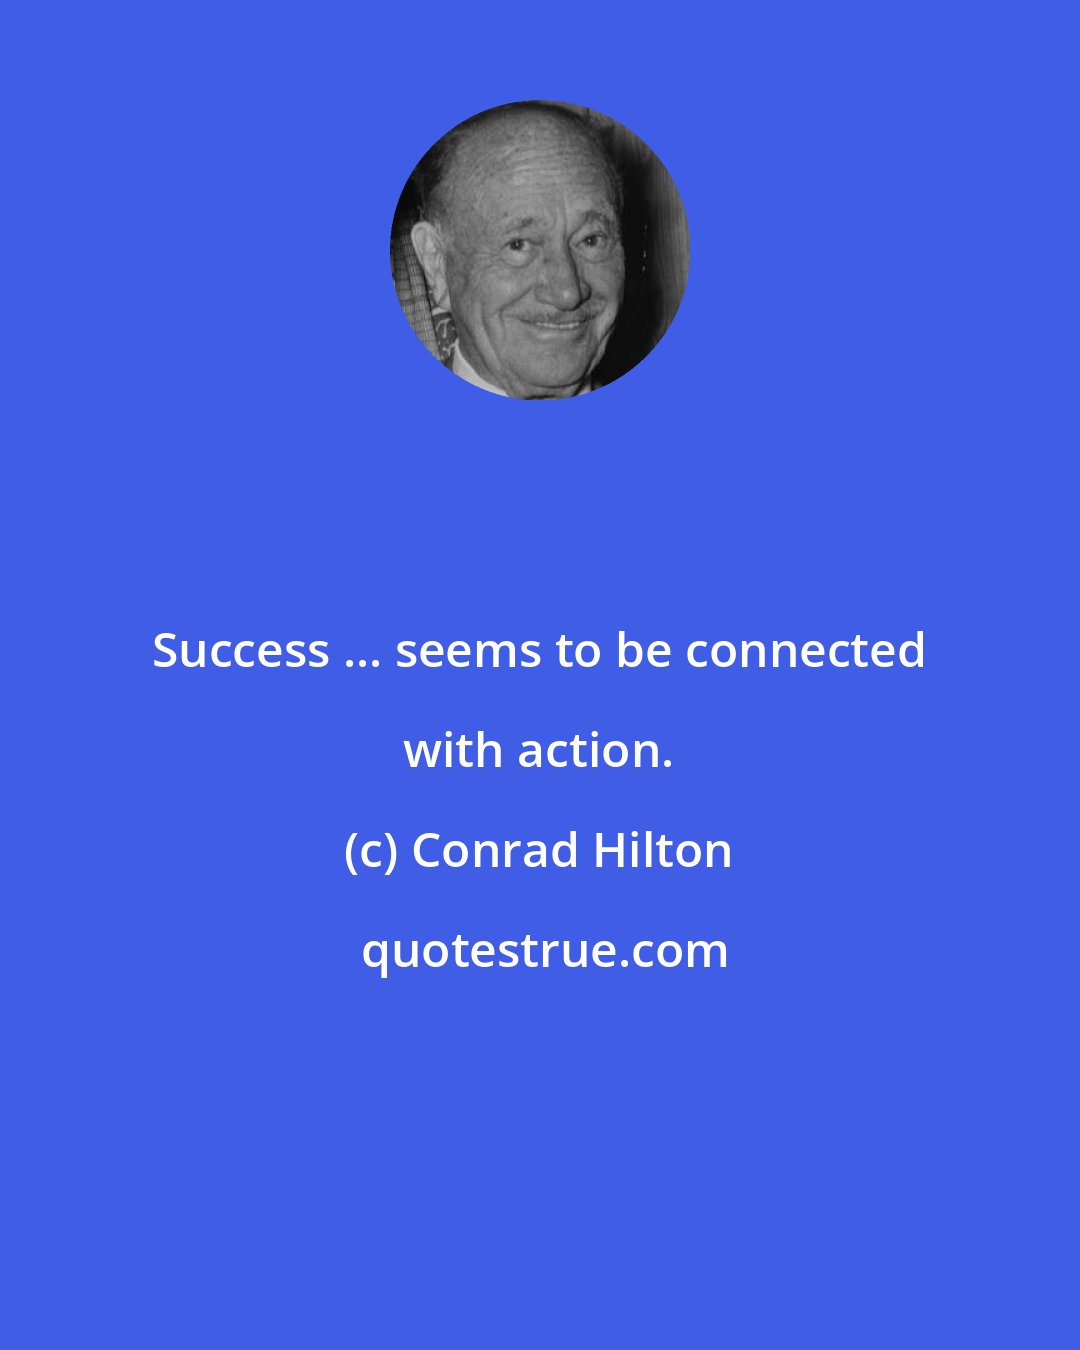 Conrad Hilton: Success ... seems to be connected with action.